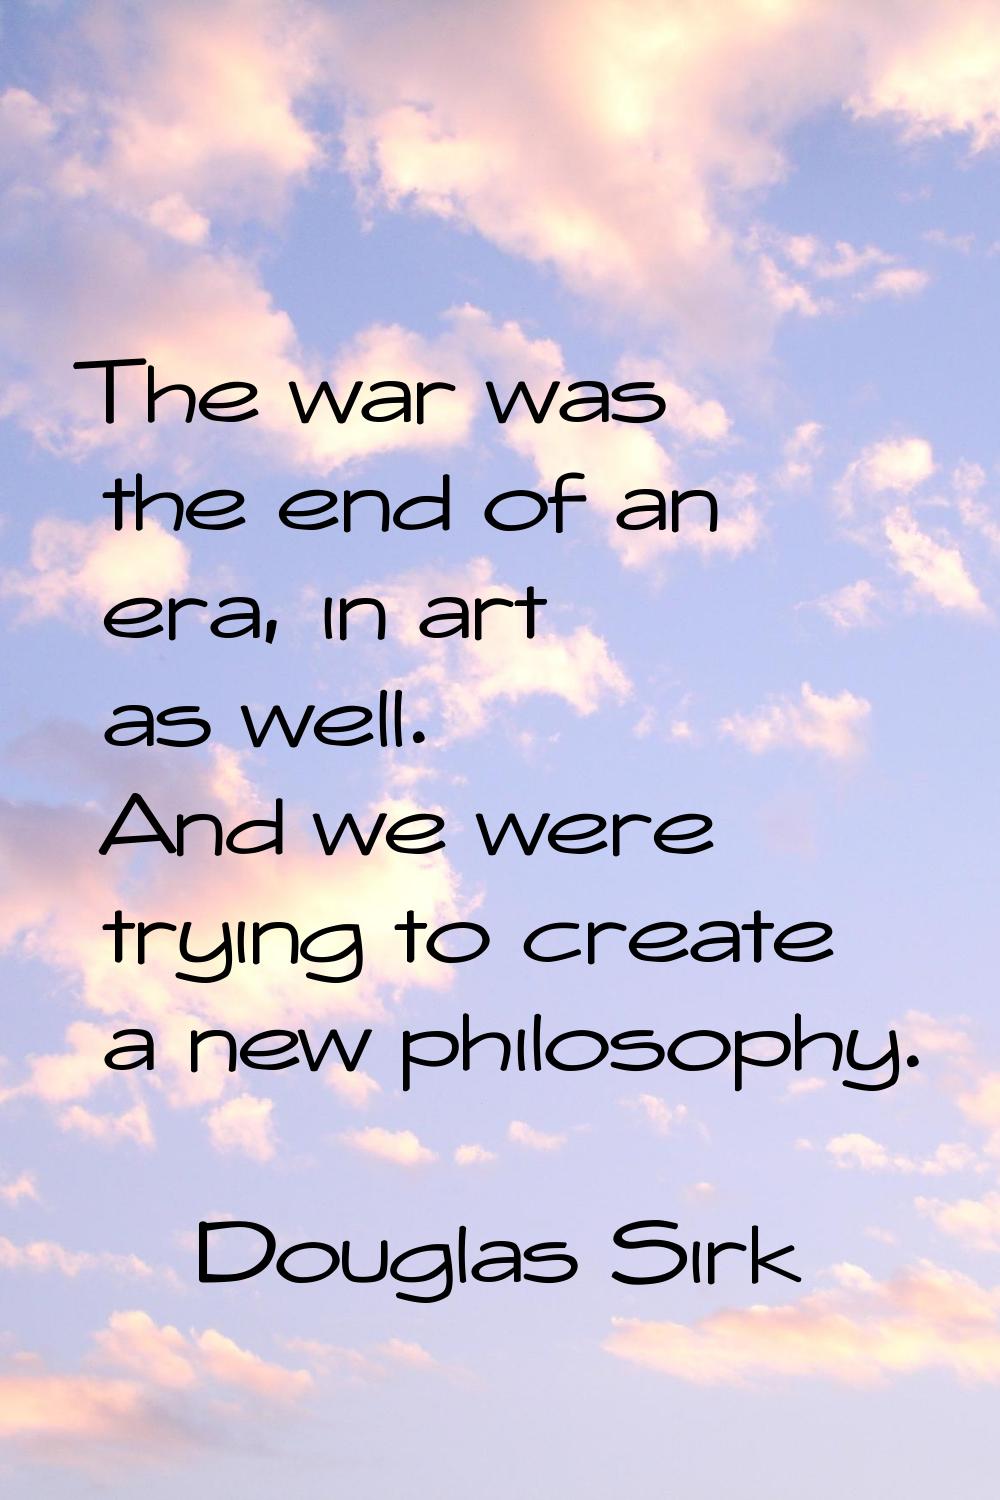 The war was the end of an era, in art as well. And we were trying to create a new philosophy.